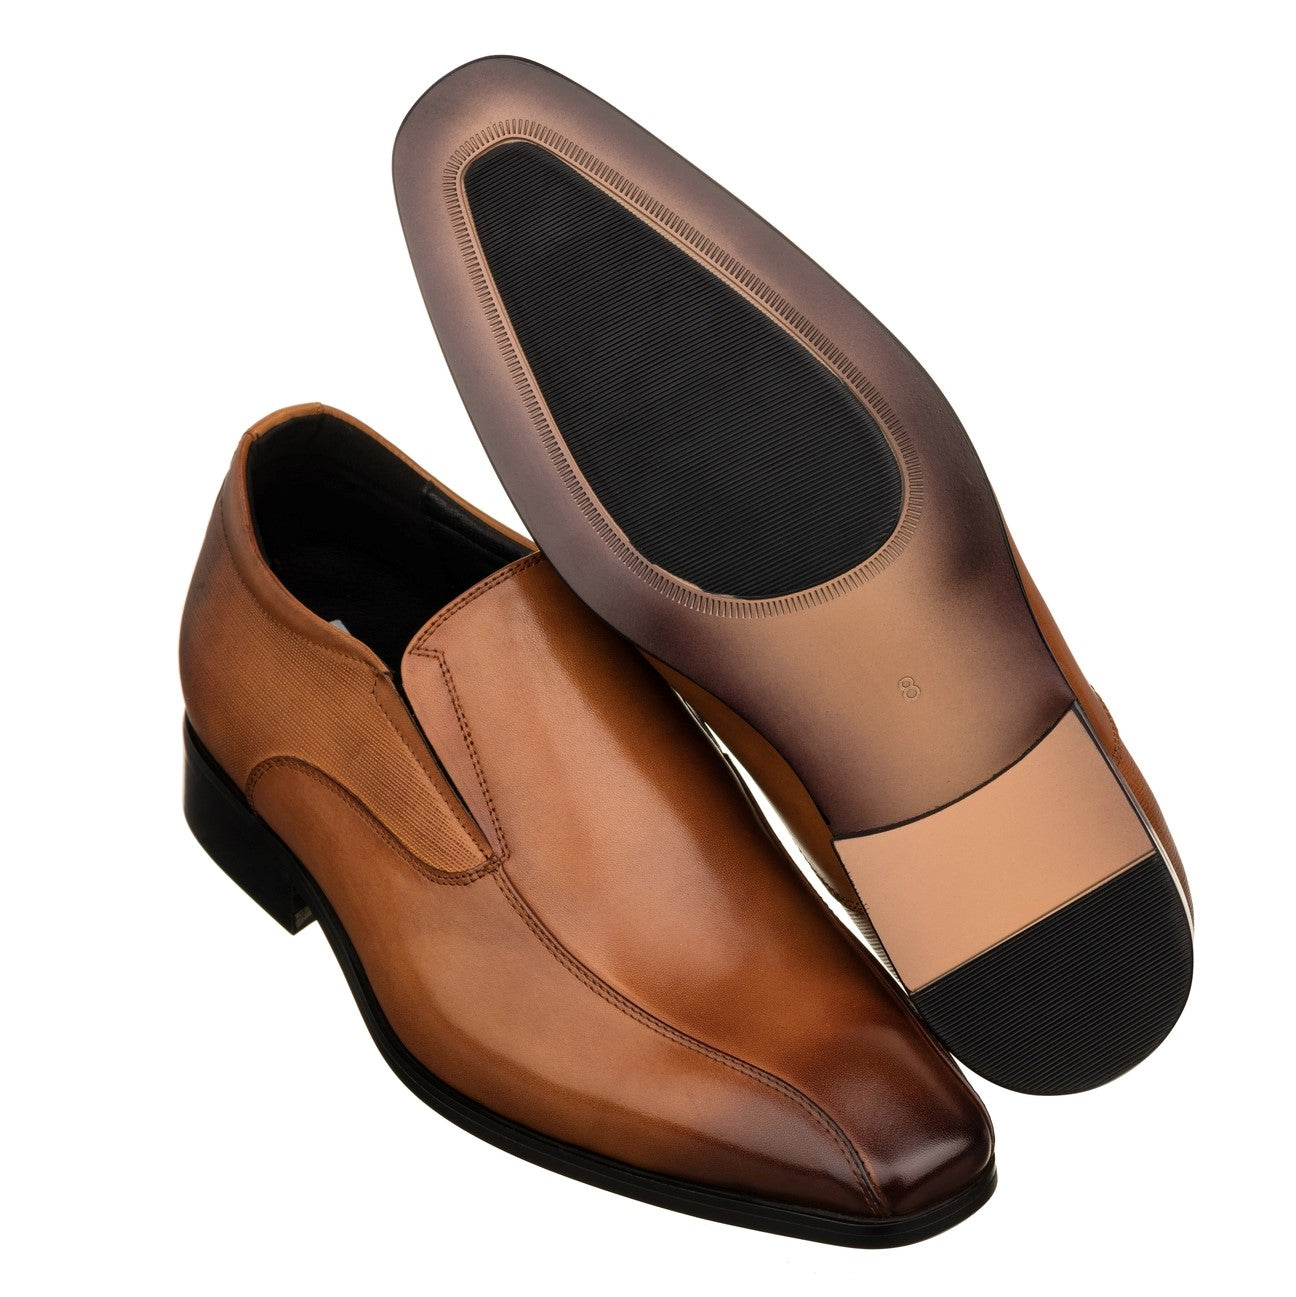 Elevator shoes height increase TOTO - Y6362 - 2.2 Inches Taller (Brown) - Slip-On Dress Oxford